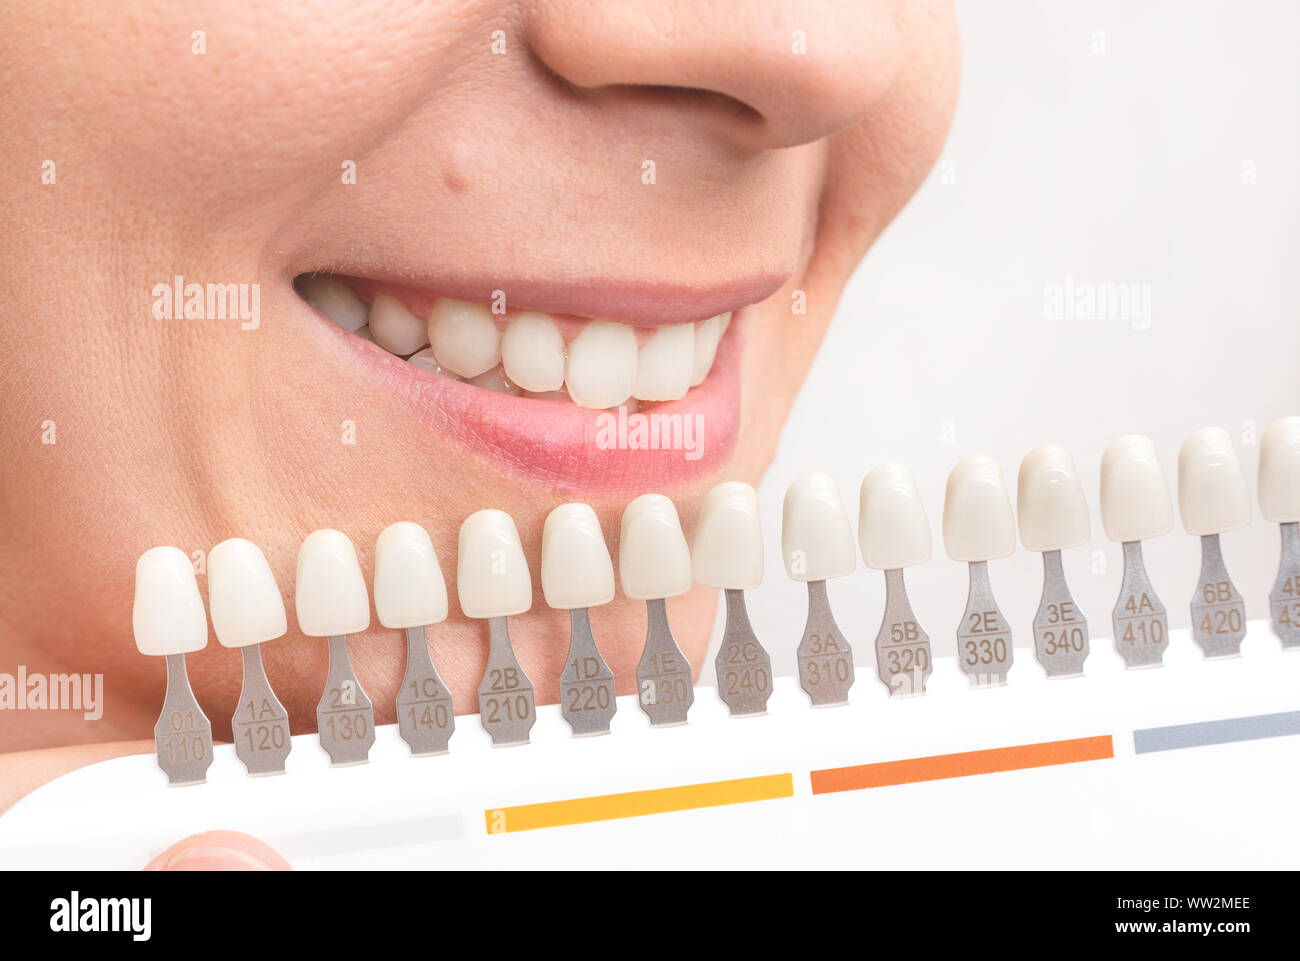 Woman smile with healthy teeth whitening. Dental care concept. Stock Photo